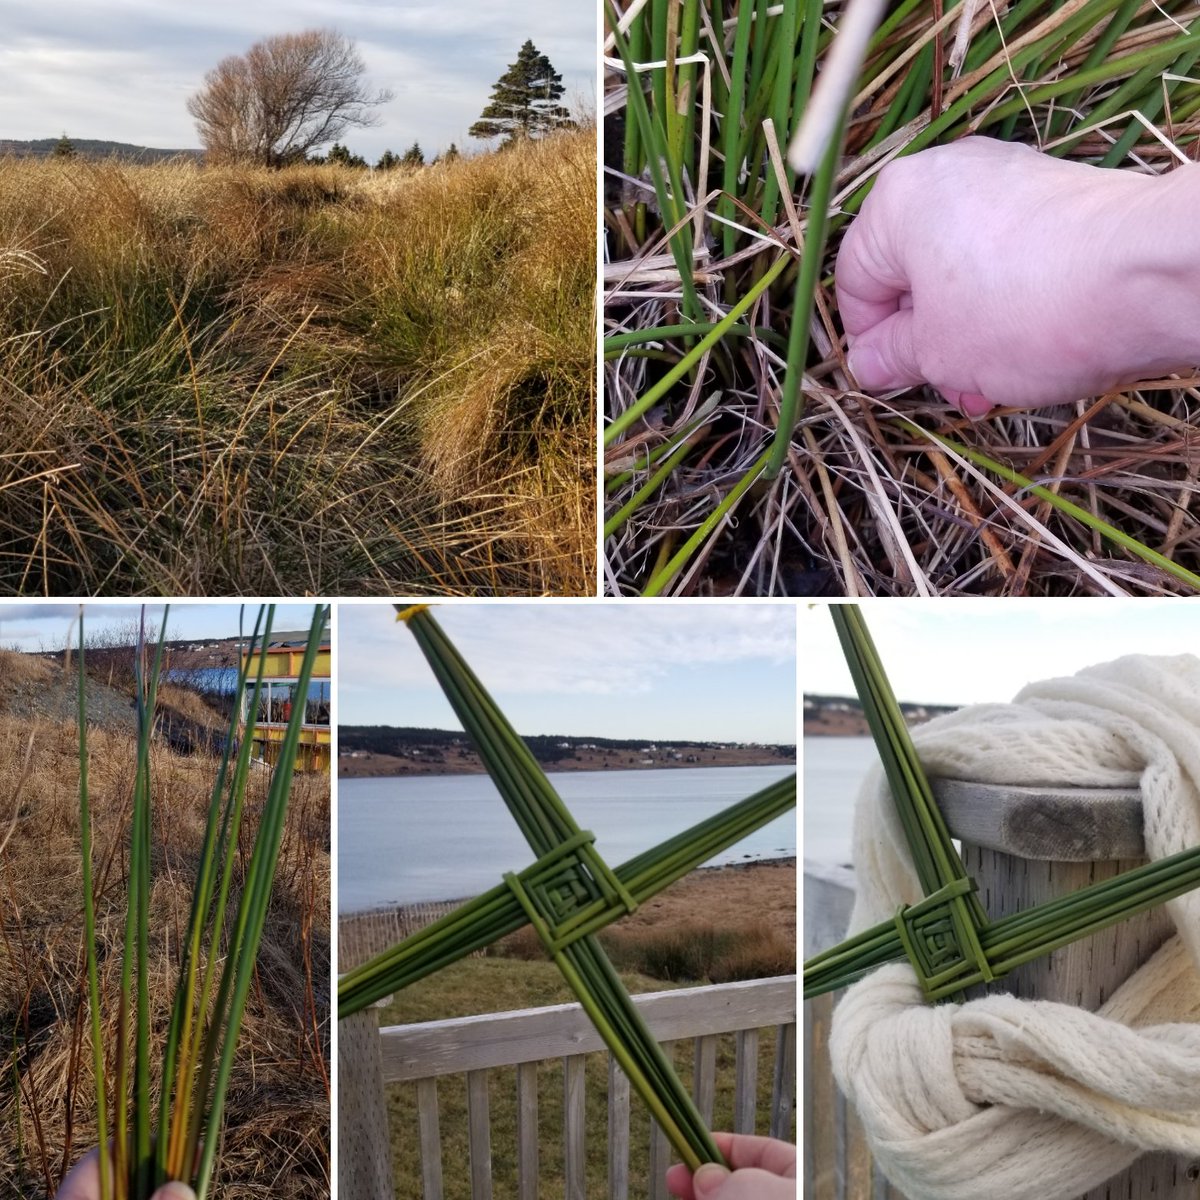 Today is the eve of #StBrigids or #Imbolc. I picked reeds to weave the traditional St. Brigid's cross right from my backyard.

The whole ritual really connected me to the land, the seasons & my ancestors. Powerful... 

#irishloop #Ireland #exploreNL #newfoundland